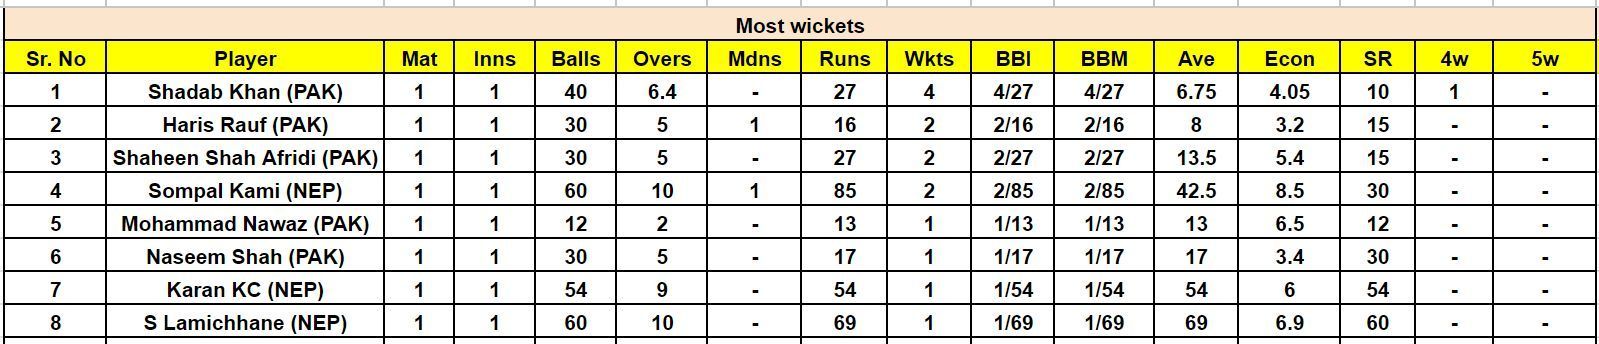 Most Wickets Leaderboard